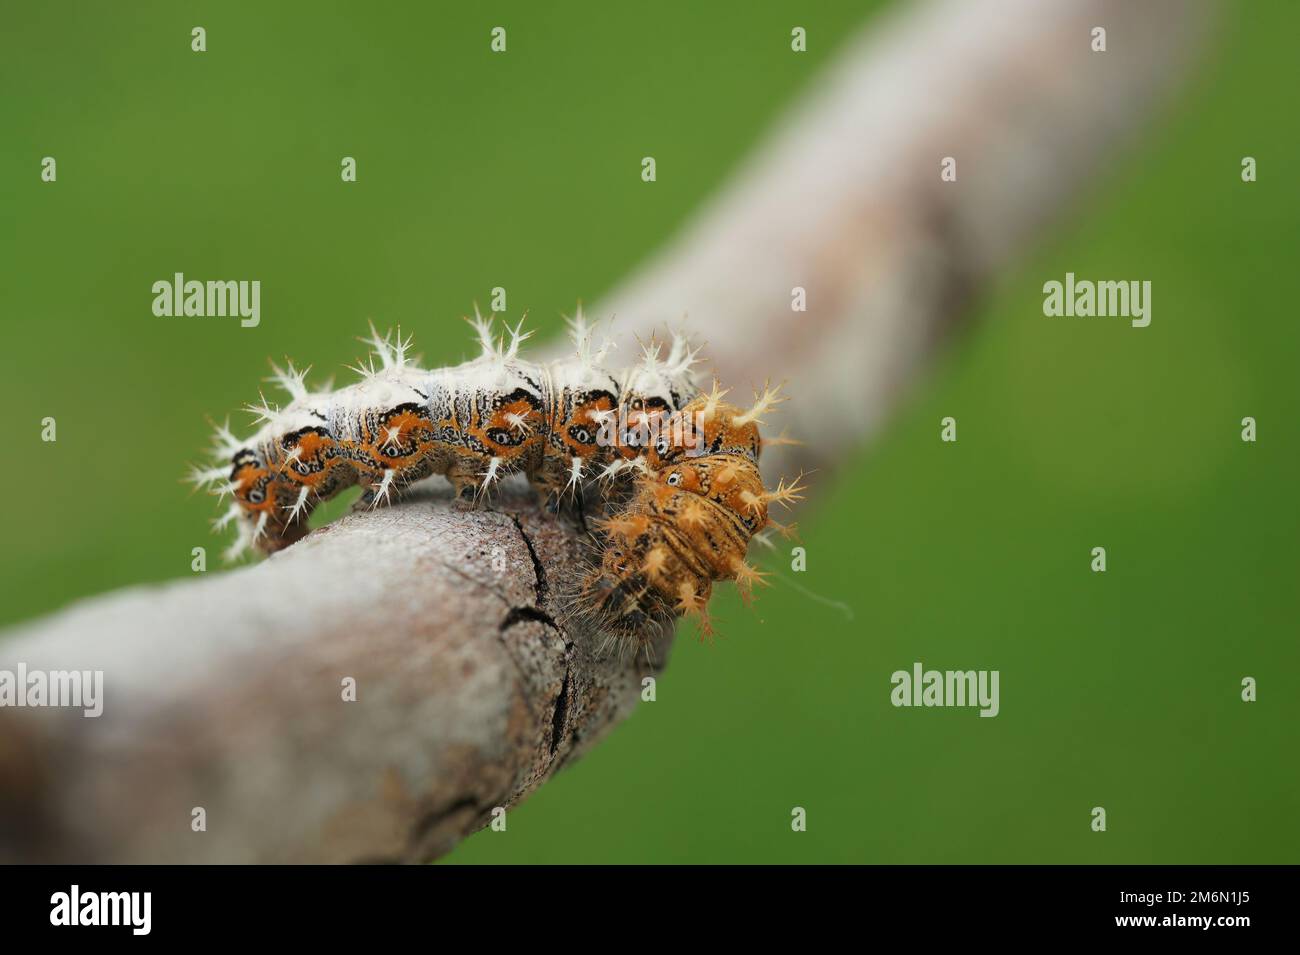 Natural closeup on the spiky caterpillar of the Comma butterfly, Polygonia c- album sitting on a twig Stock Photo